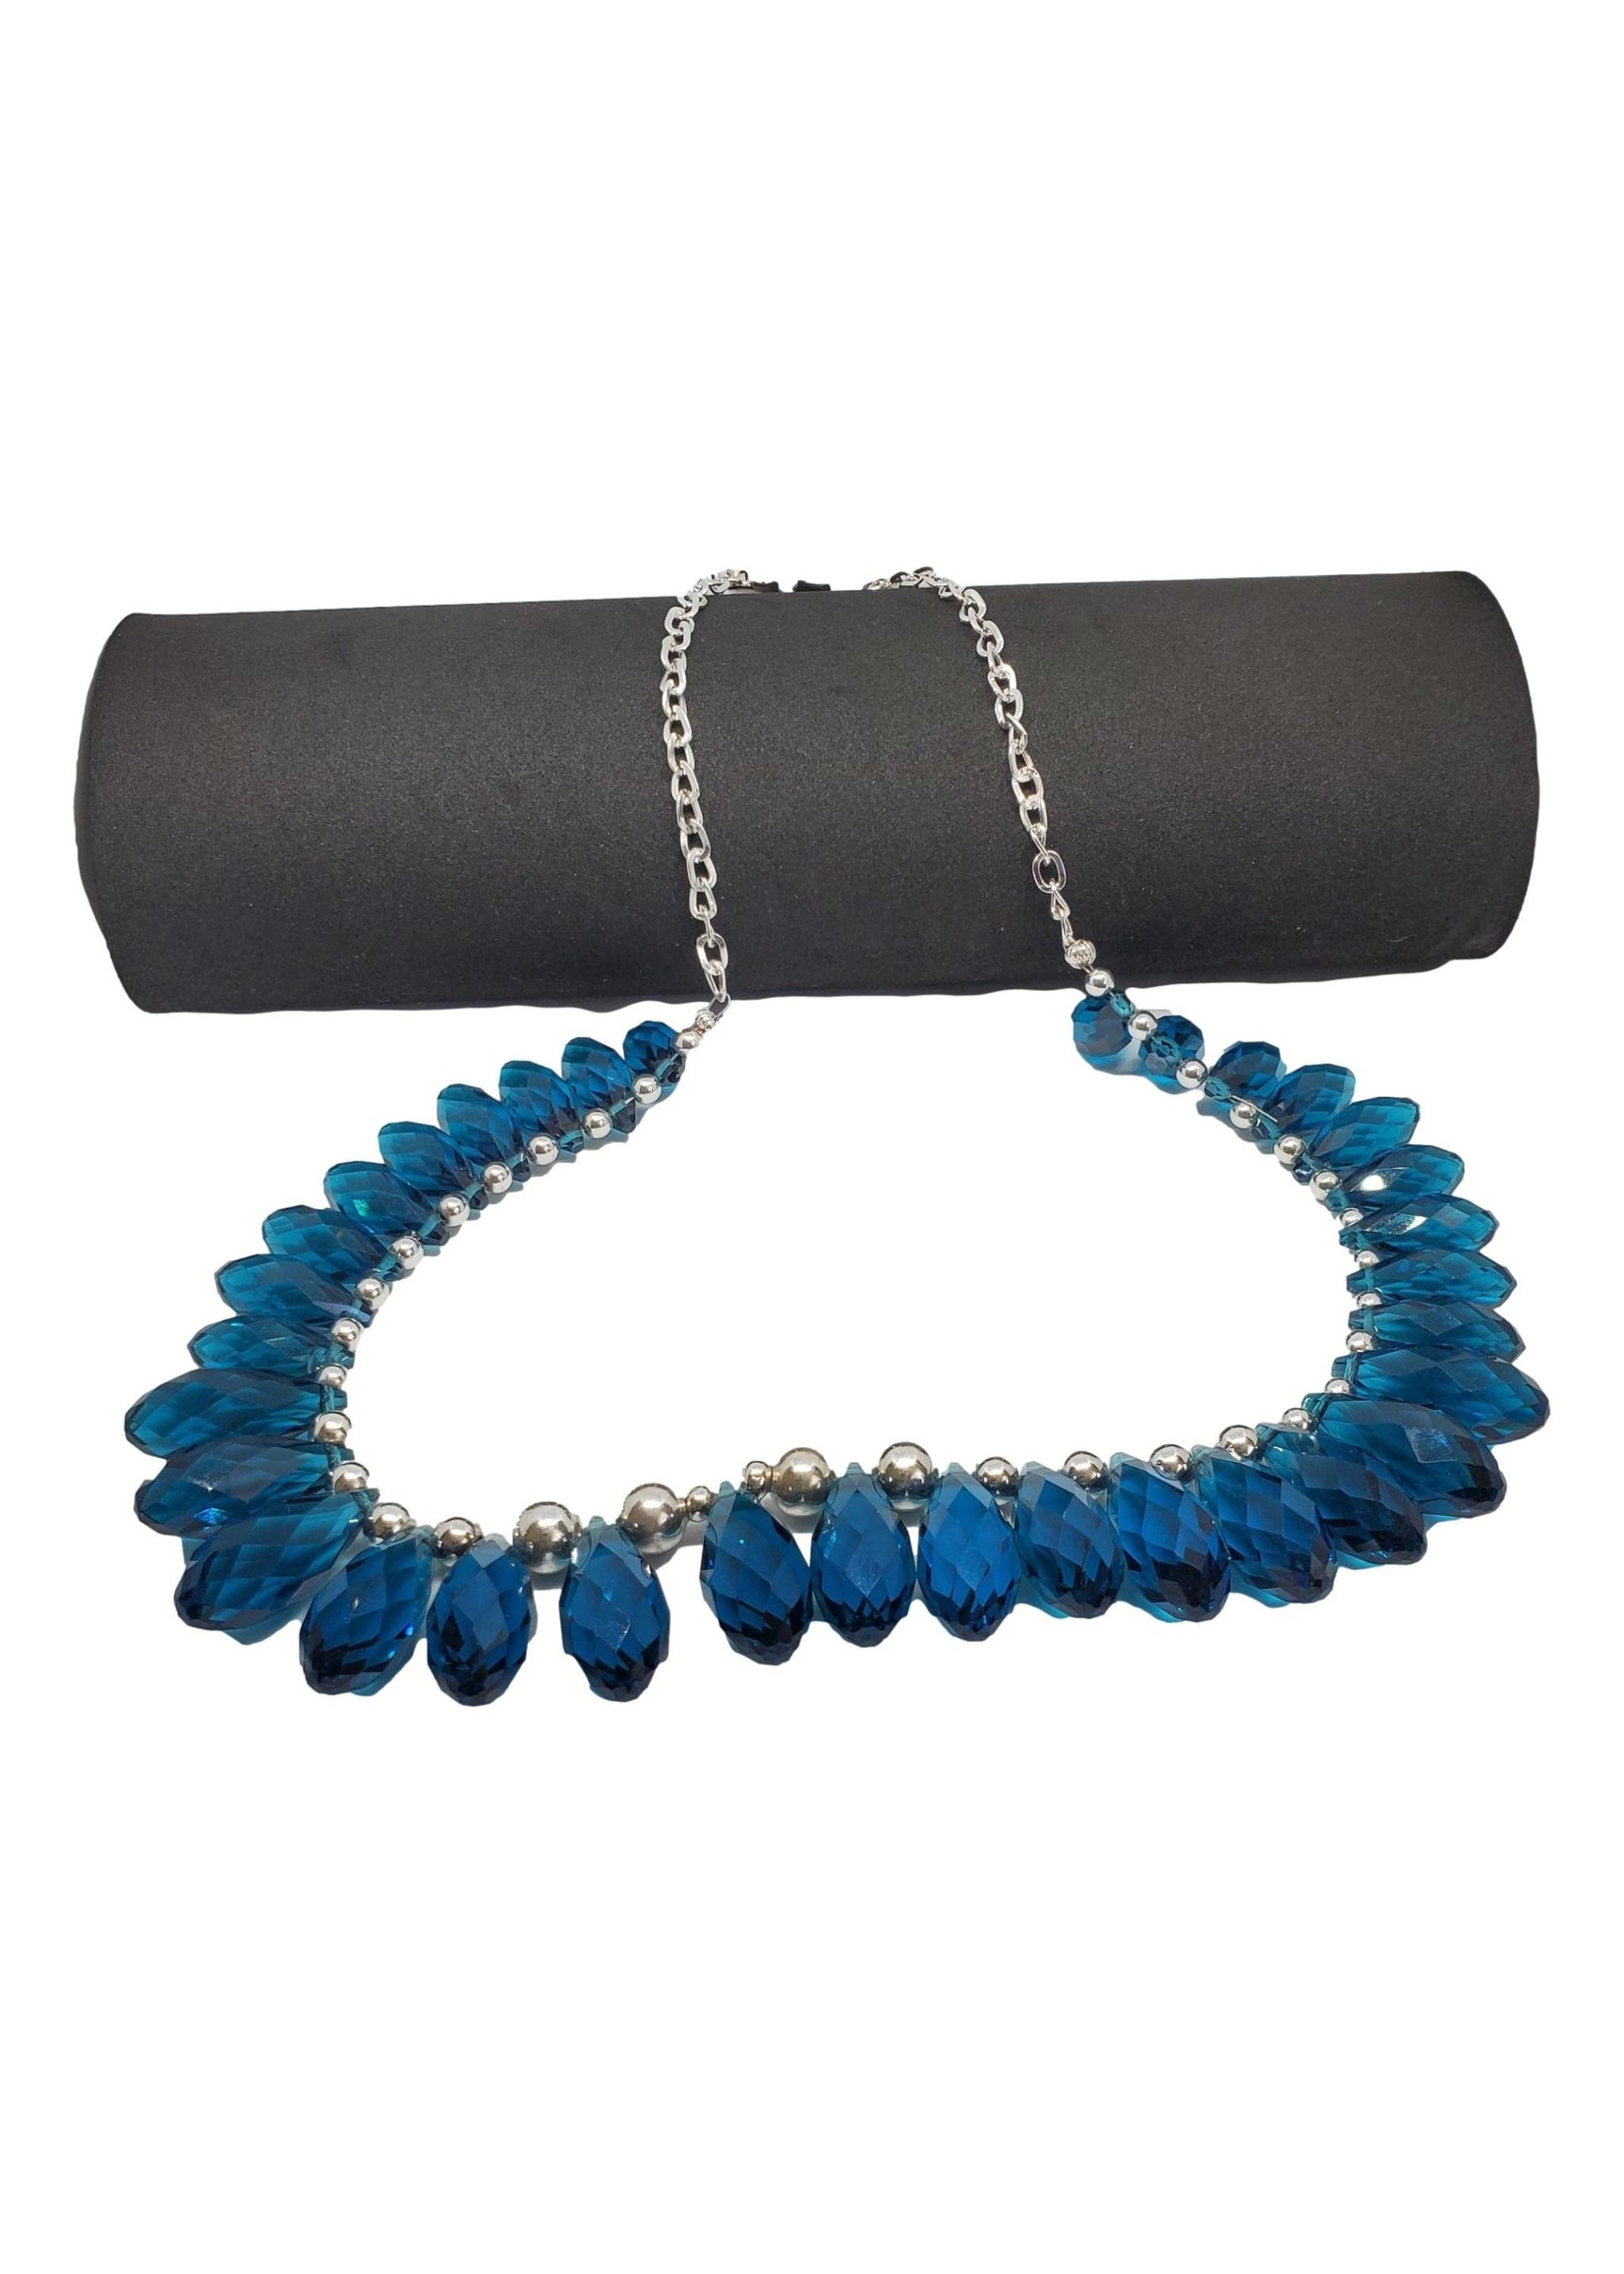 Jewellery by Deborah Young-Groves Silver-toned Necklace with Blue Glass Drop Stones